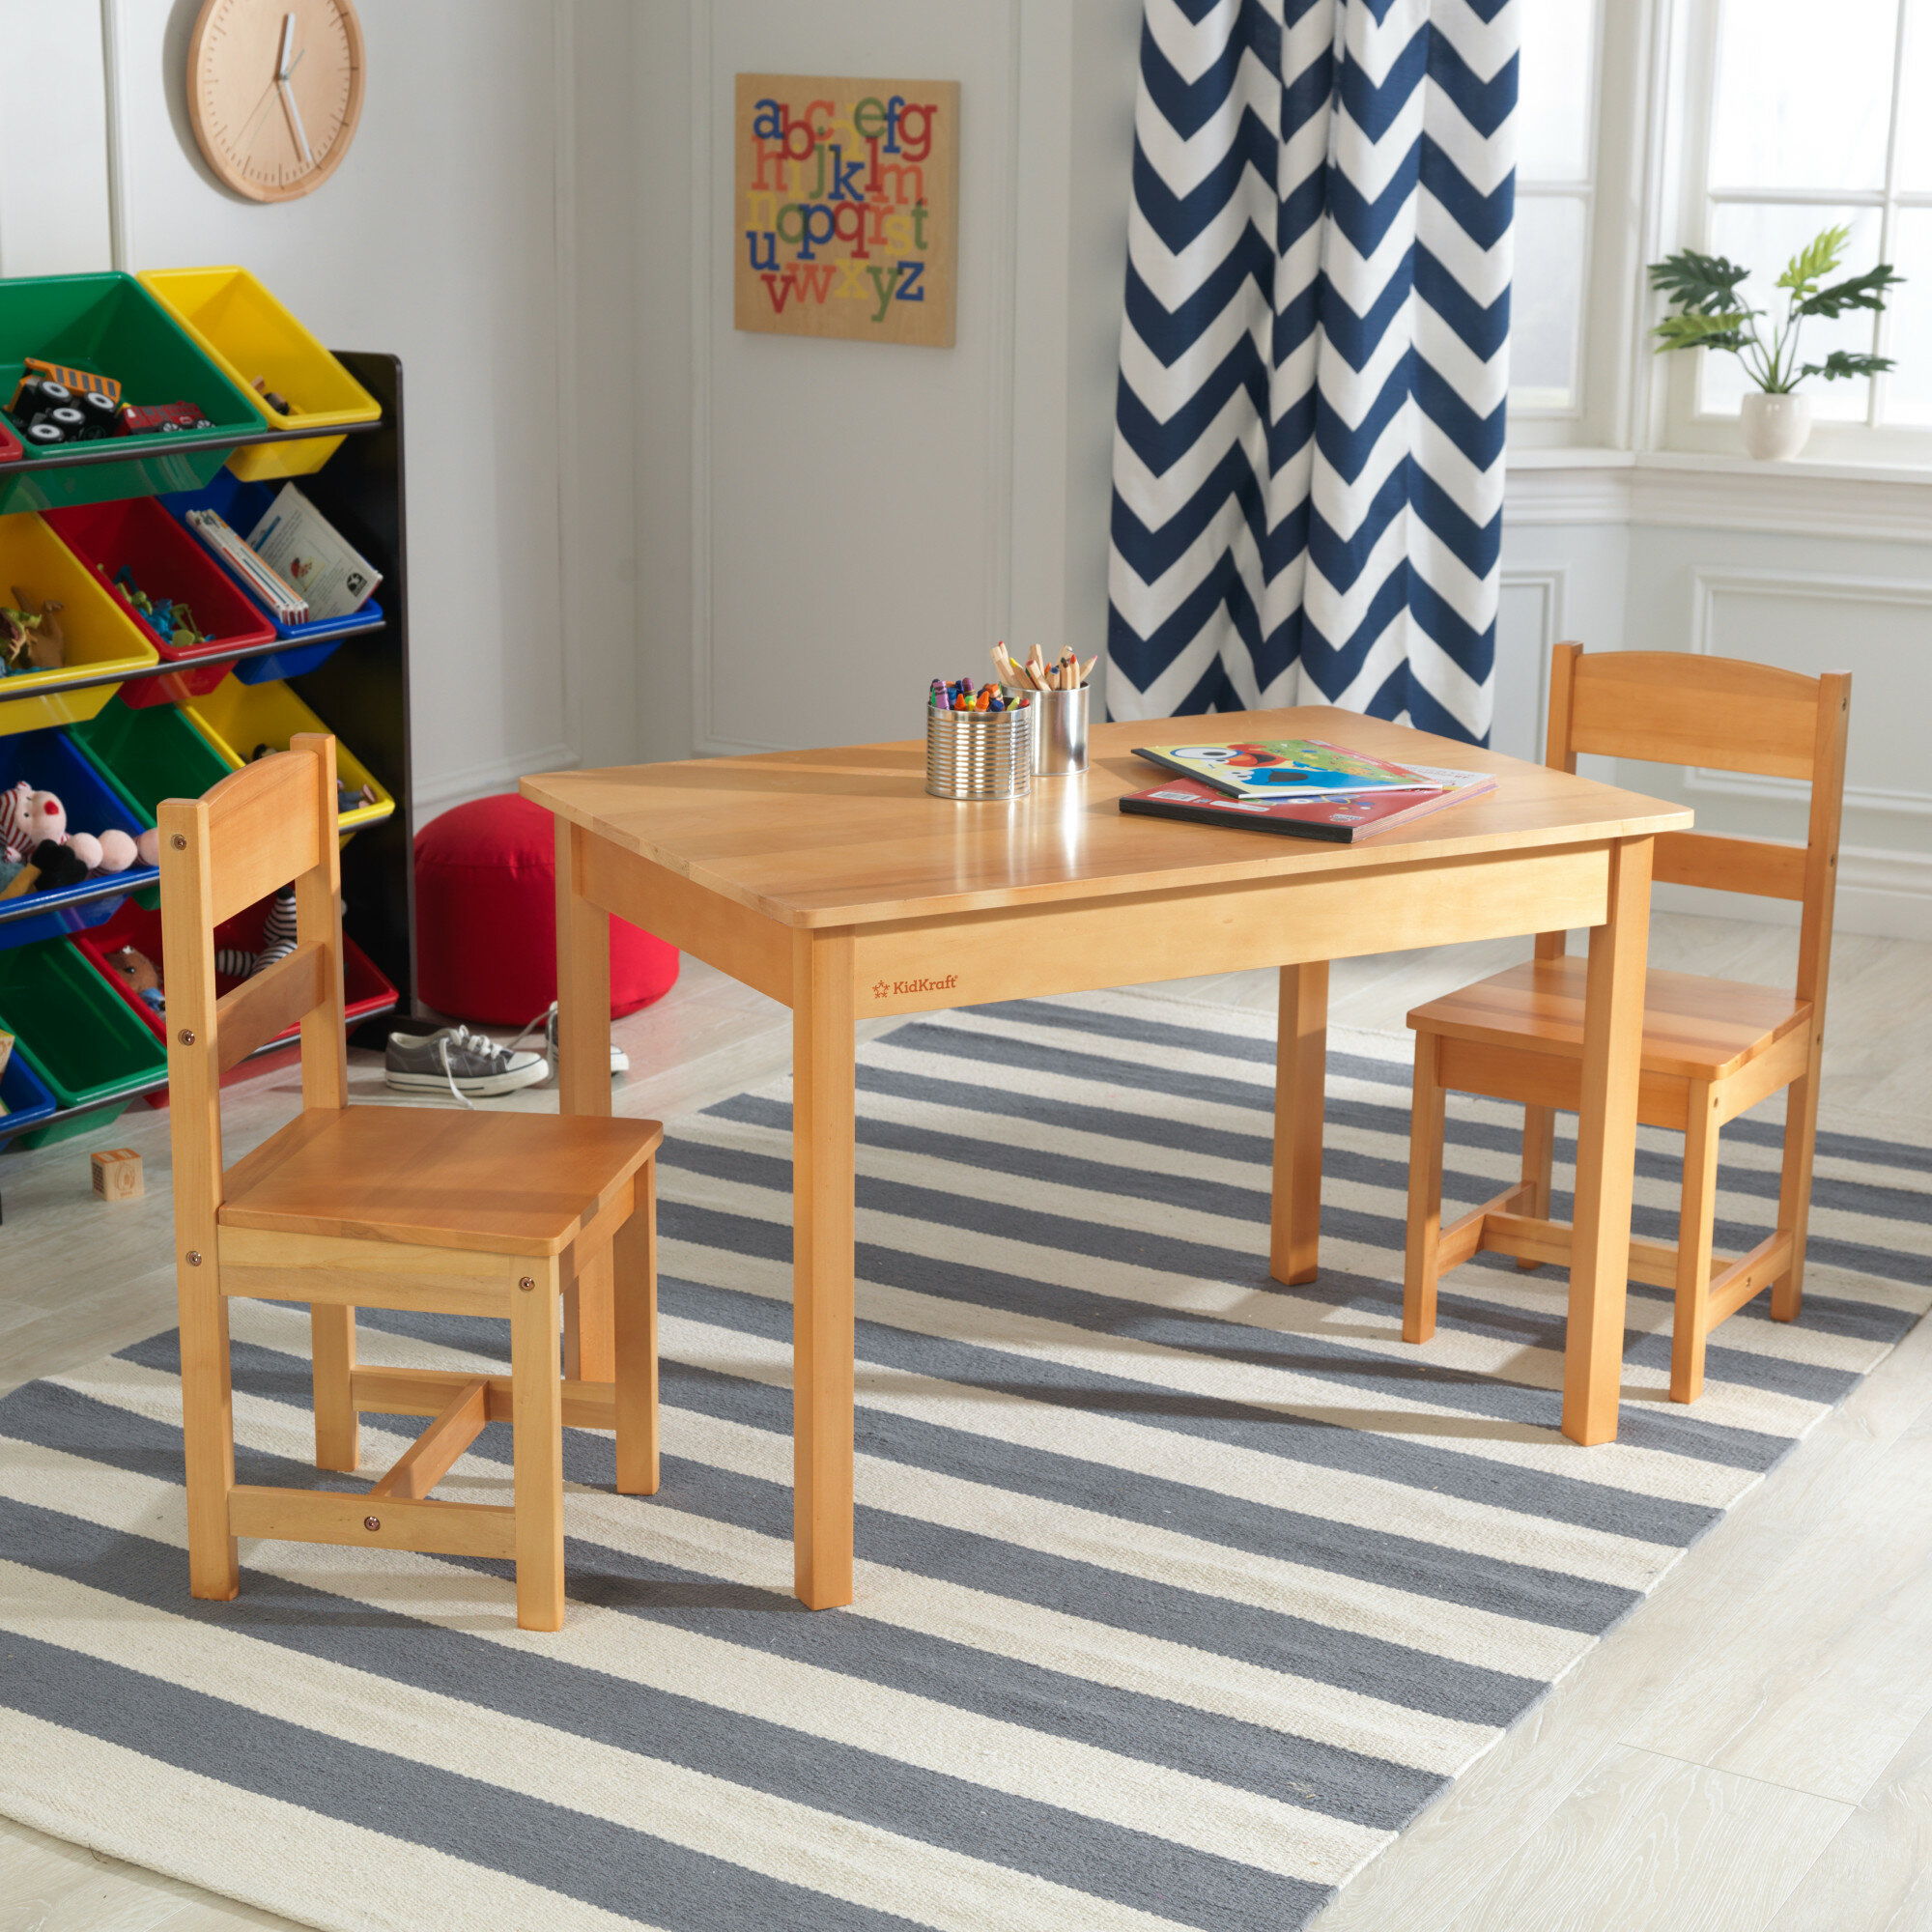 childrens small wooden table and chairs